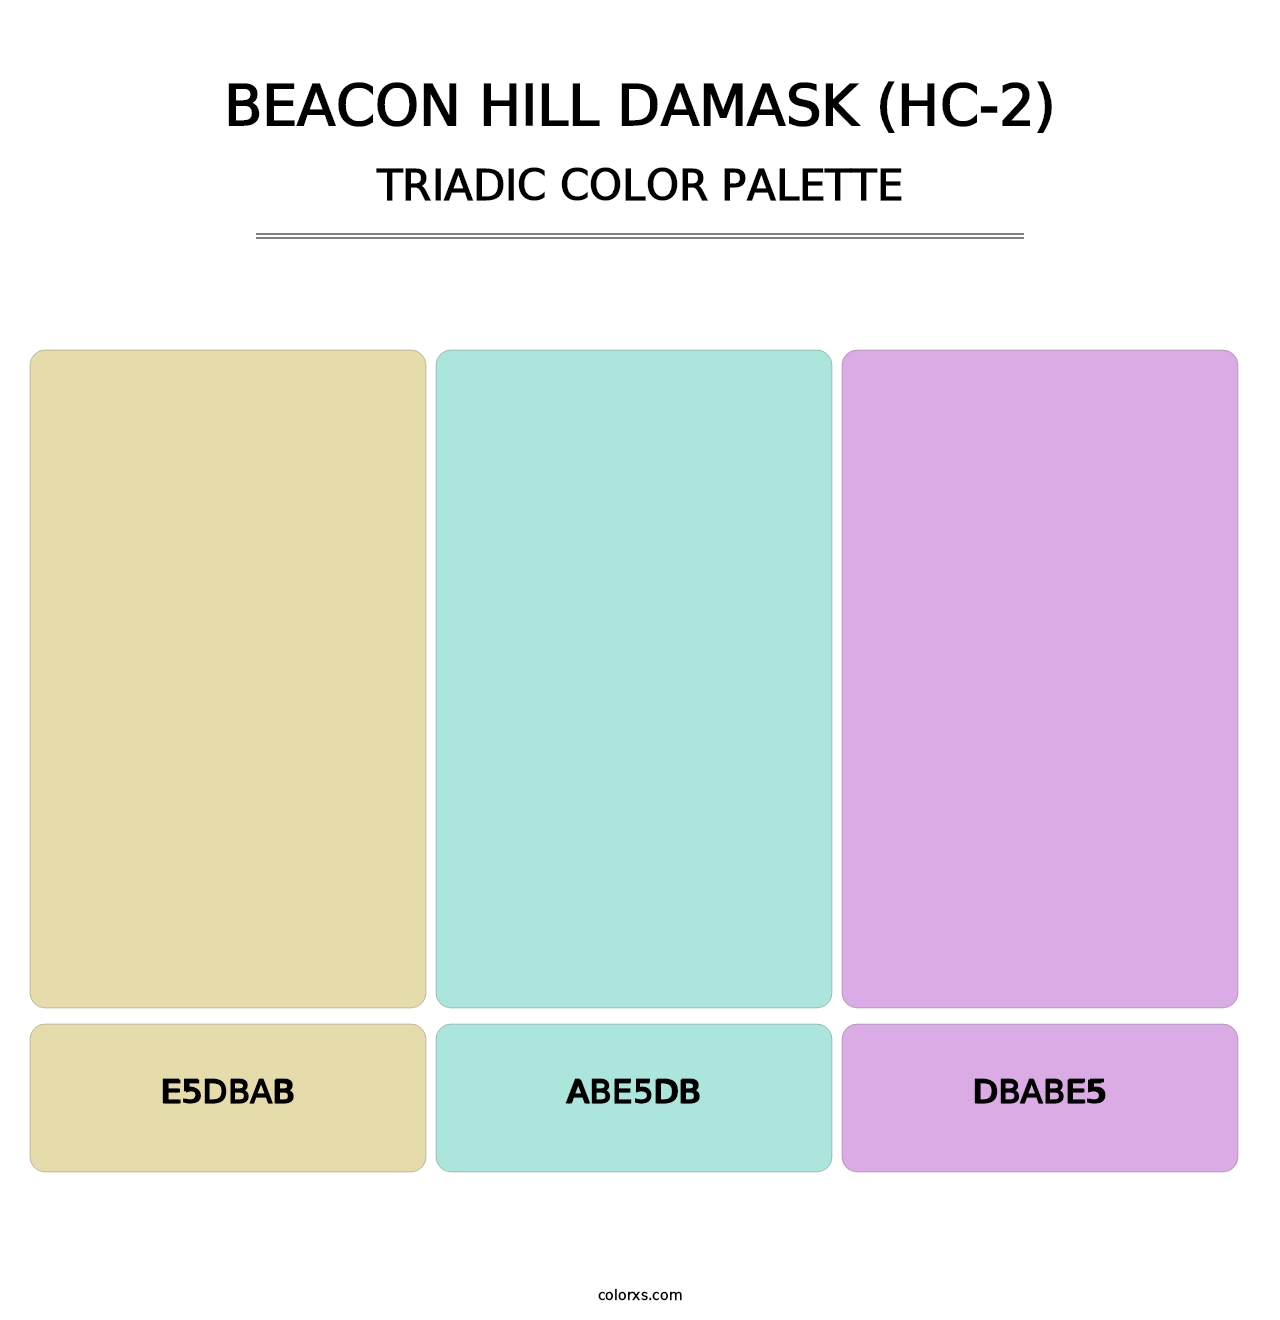 Beacon Hill Damask (HC-2) - Triadic Color Palette